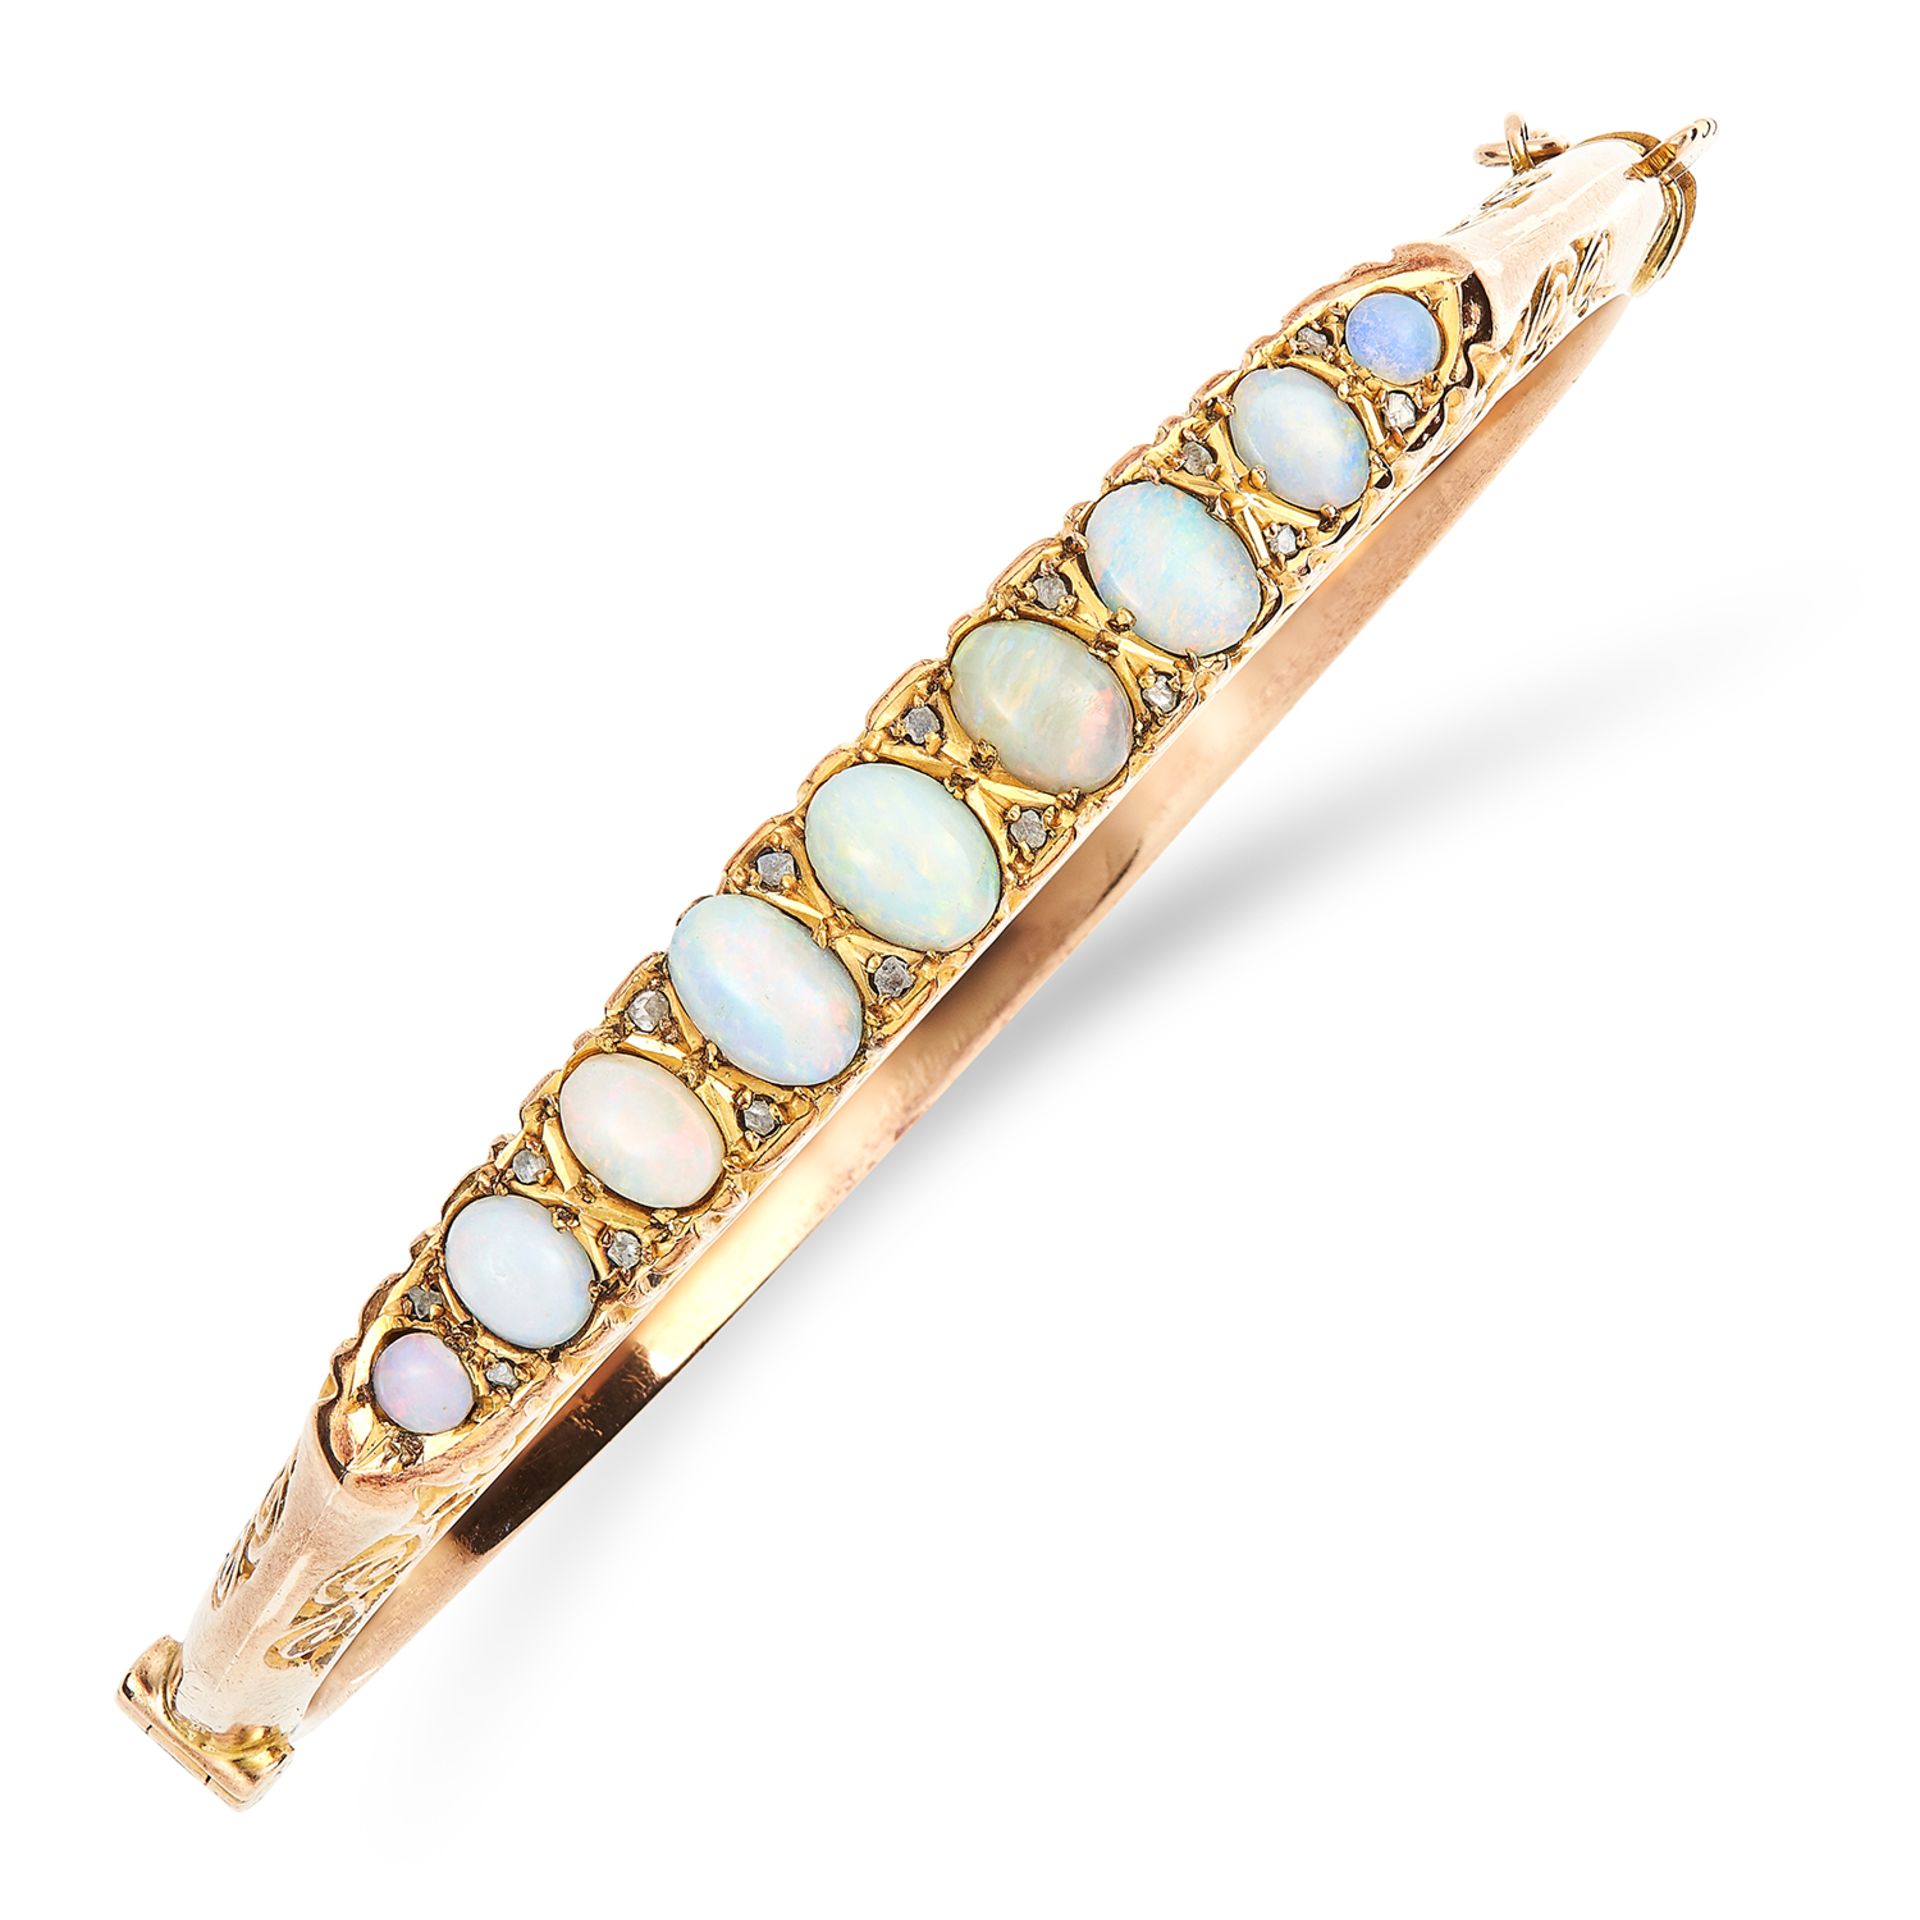 ANTIQUE VICTORIAN OPAL AND DIAMOND BANGLE set with cabochon opals and diamond sparks, 6cm inner